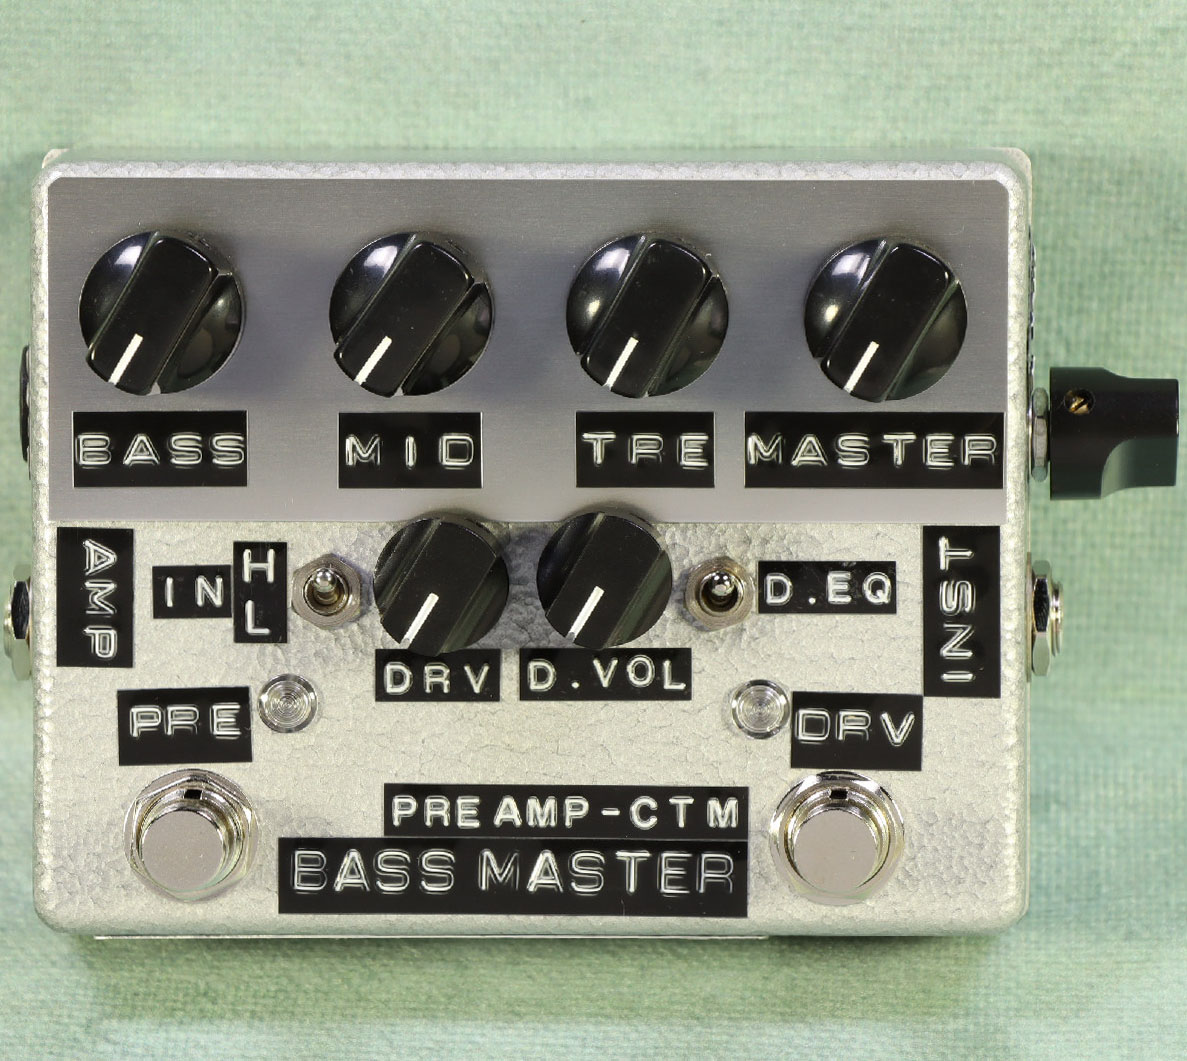 Level　イシバシ楽器　Attenuator　Master　EQ.　Switch　Preamp　Input　Shin's　BMP-1　with　ベースプリアンプ　Music　Select　Bass　Switch/Drive